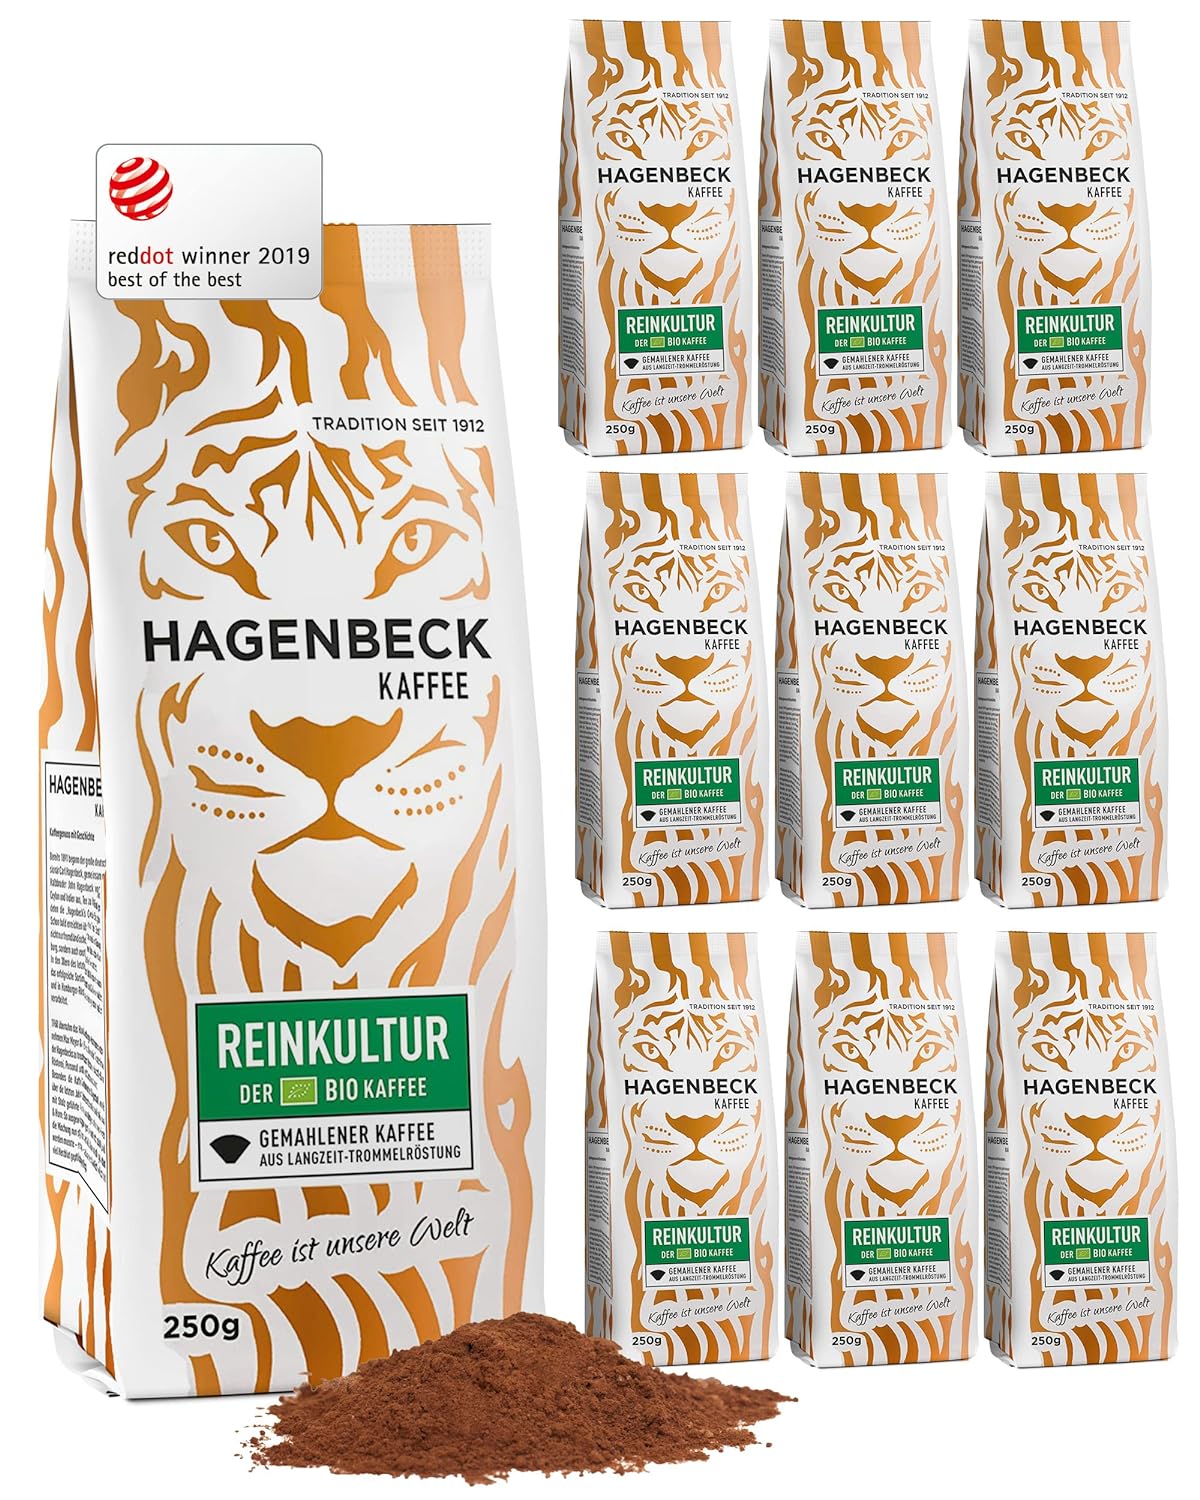 Hagenbeck Organic Pure Culture 10x250g (2,5kg) | Organic Coffee Ground & Classic Aromatic | Moderate Intensity | Ground coffee from German roasting | 100% Arabica blend made from organic coffee beans
